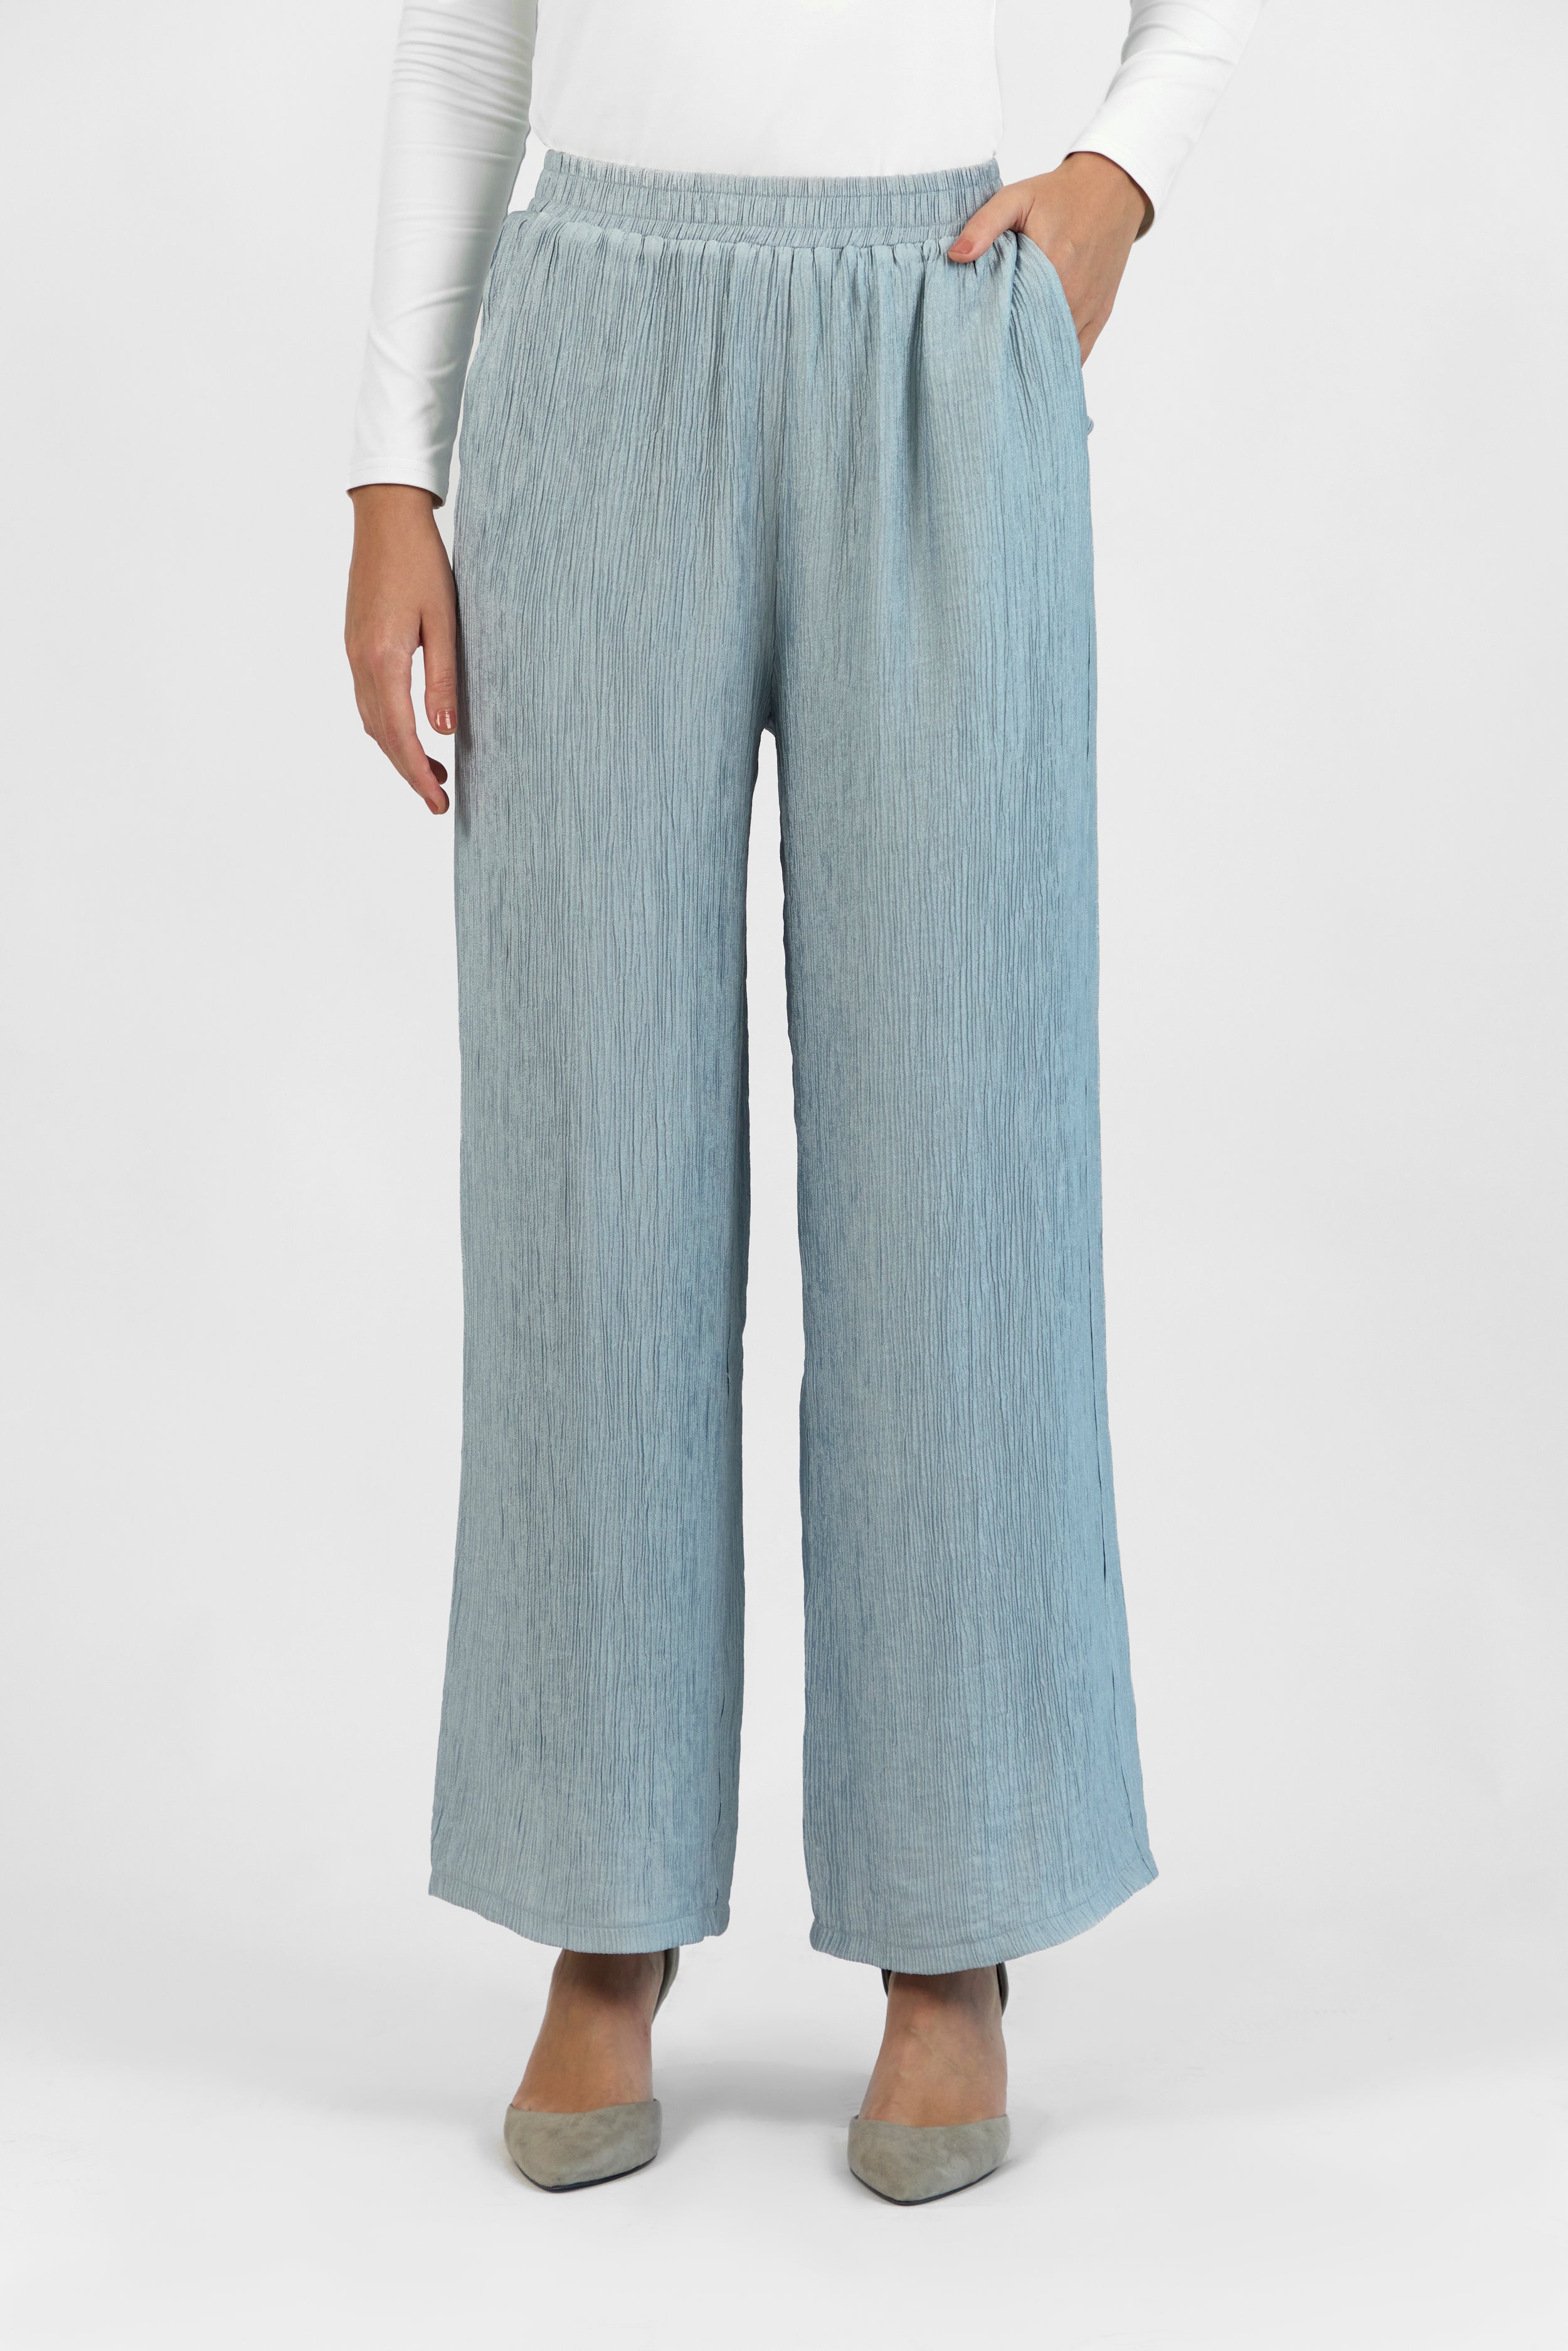 AE - Rippled Relaxed Fit Pants - Icy Blue